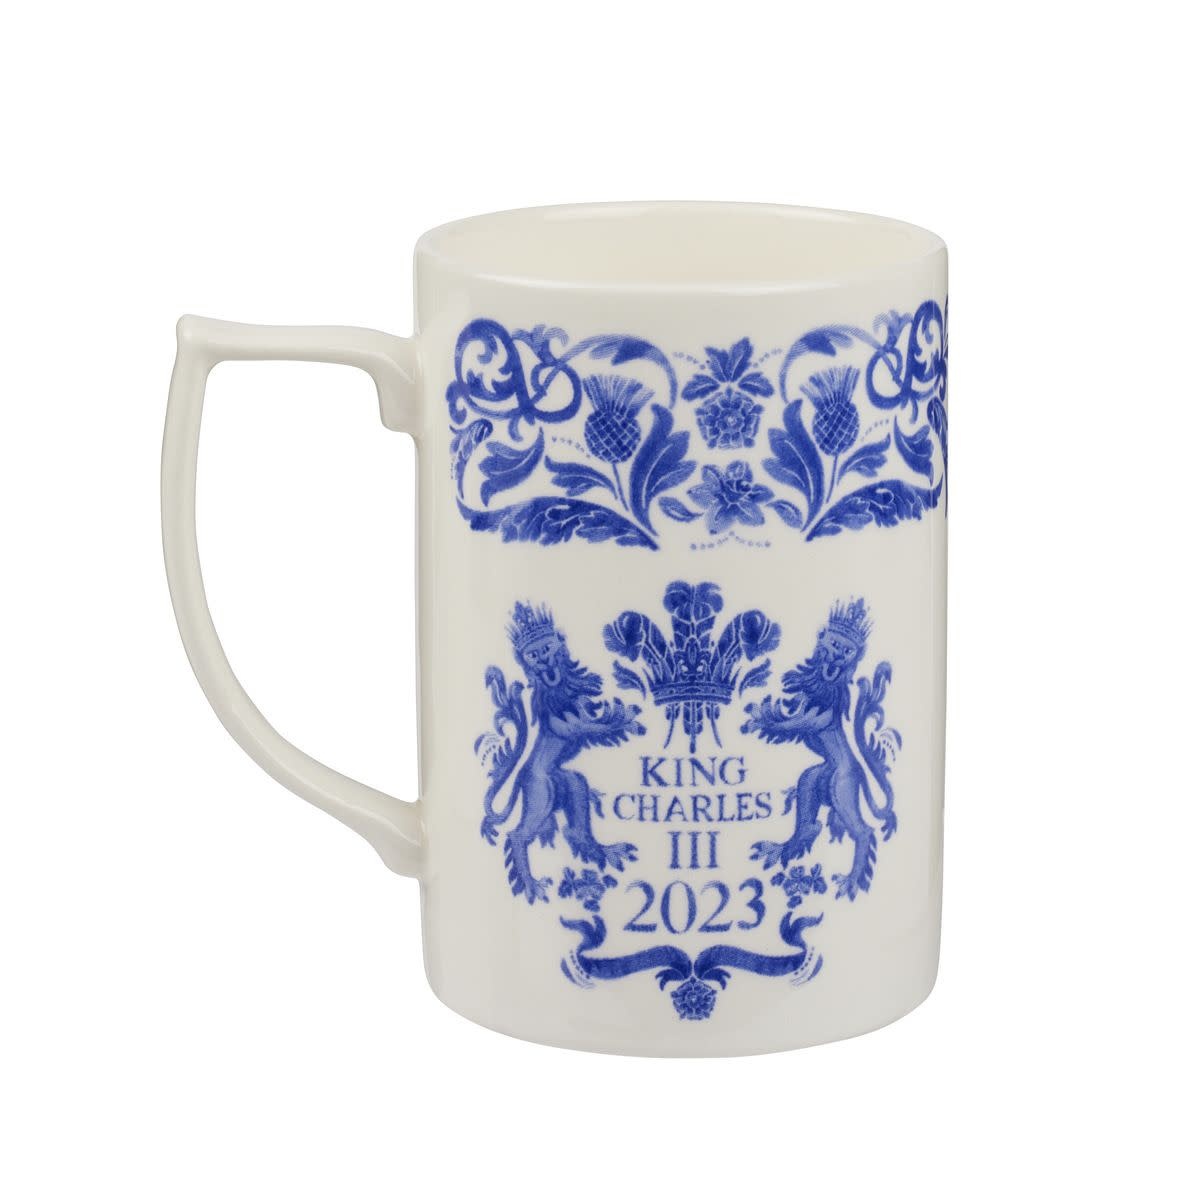 London Pottery – Kings & Queens